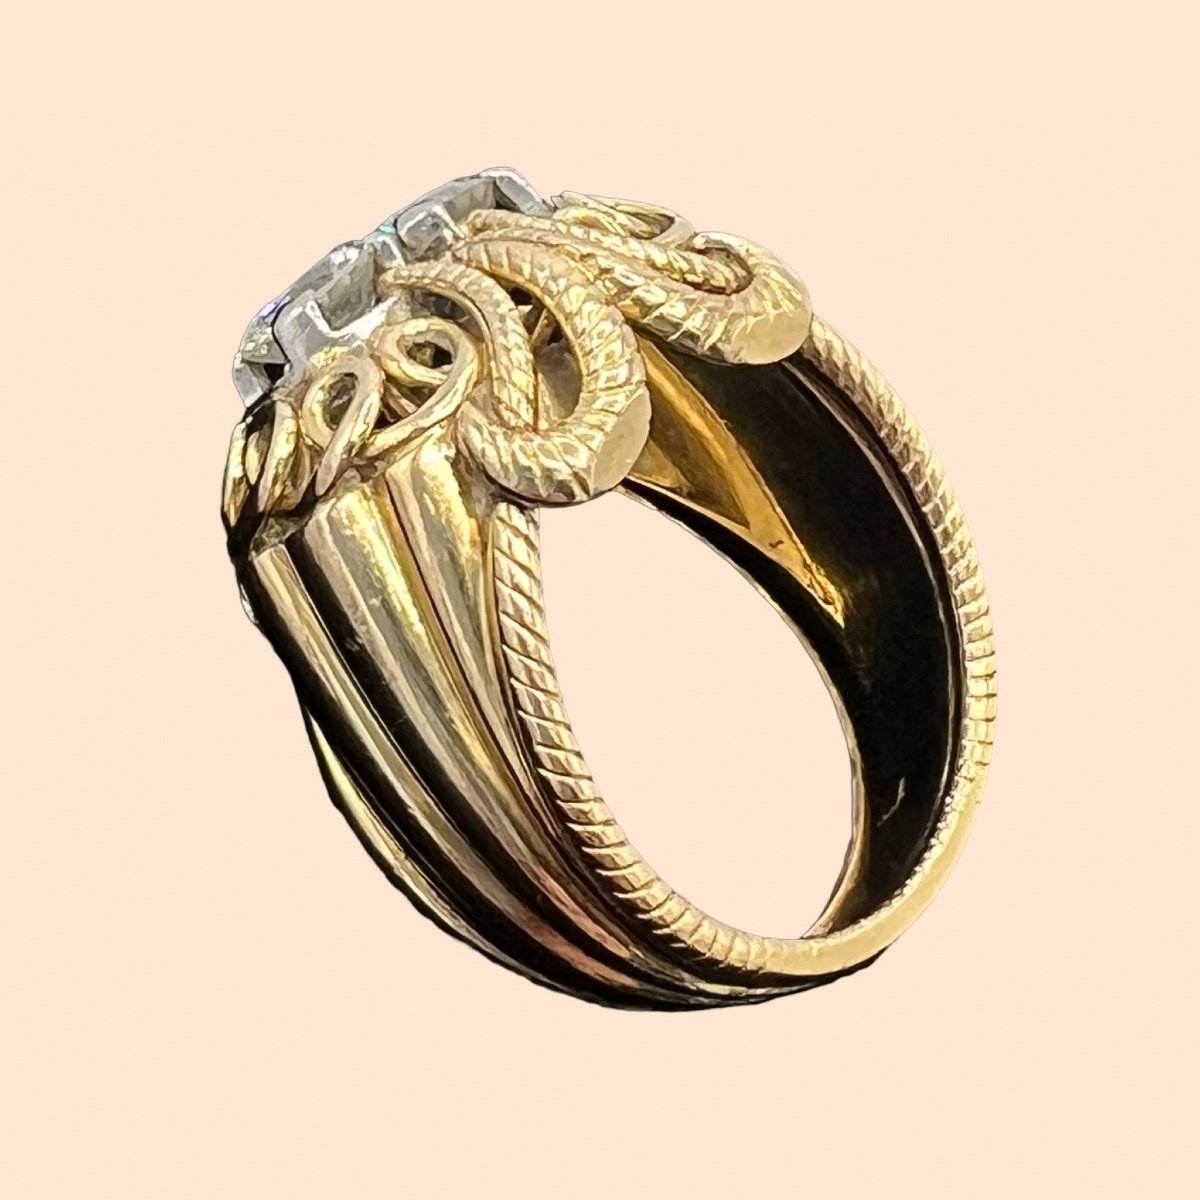 Superb Cocktail Ring From The 1950s In 18 Carat Gold, Set With Two Modern Cut Diamonds,-photo-6